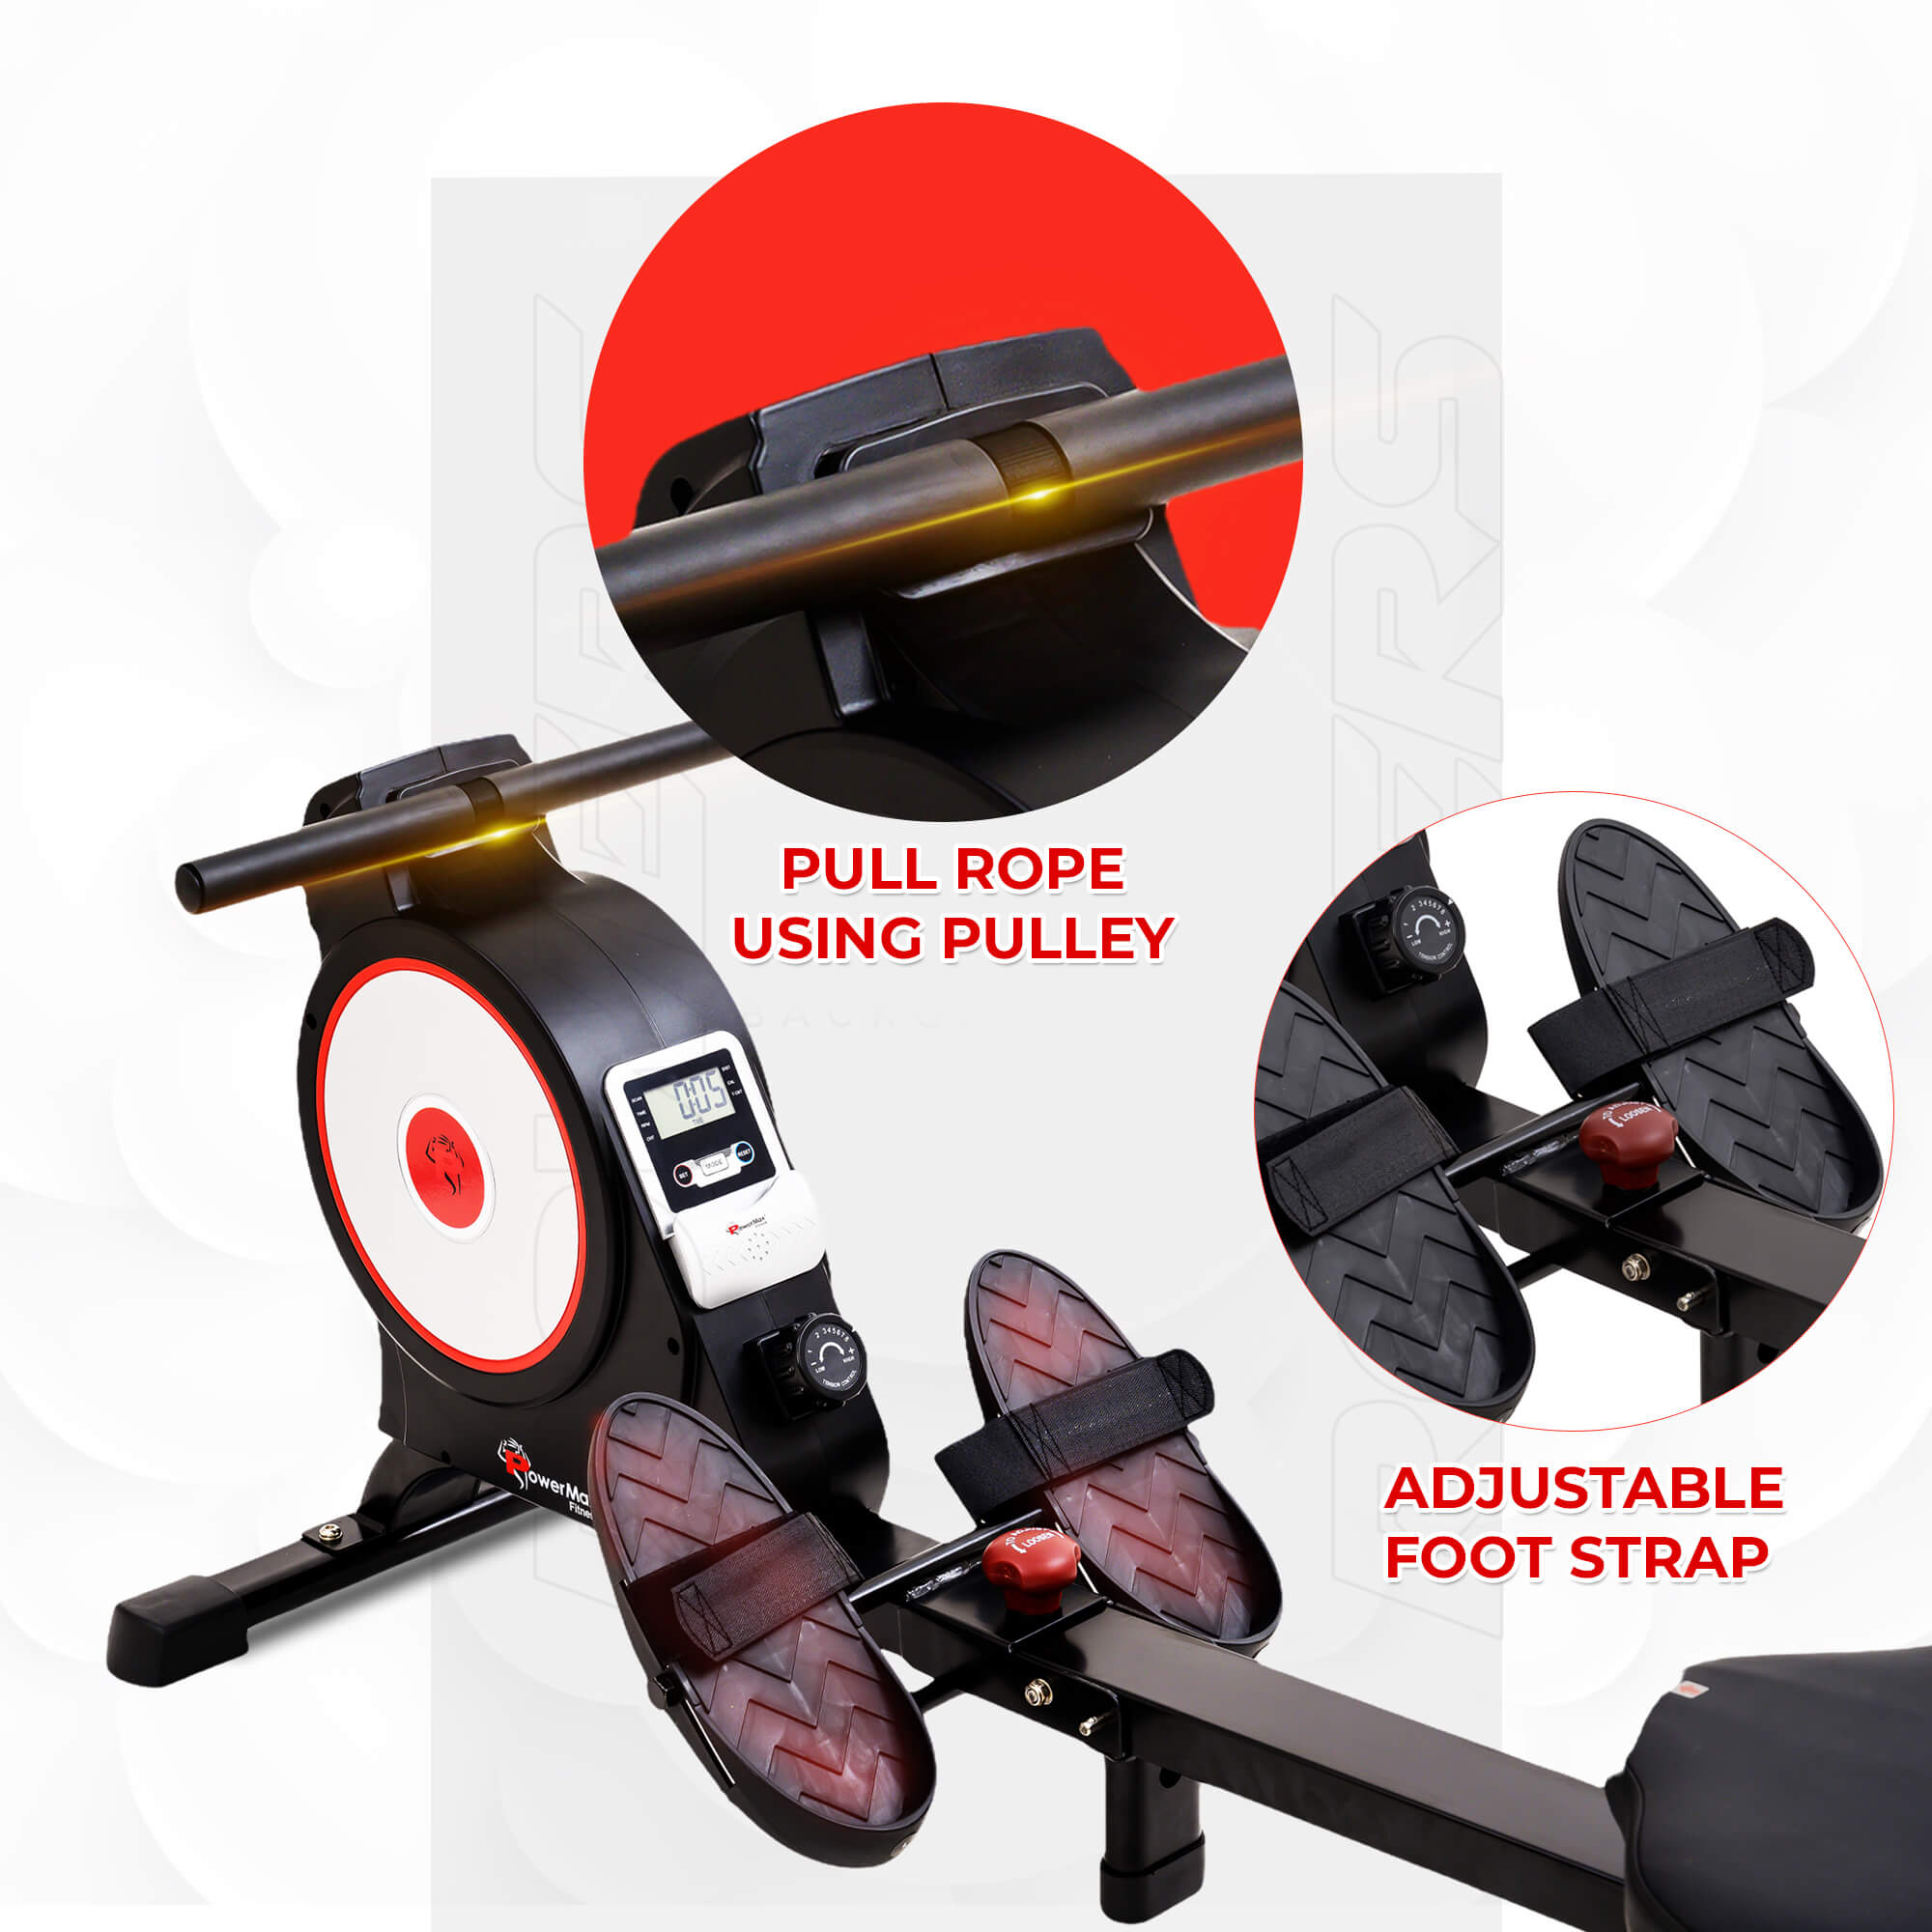 PowerMax Fitness New 2021 RH-150 Magnetic Foldable Rowing Machine for Home use